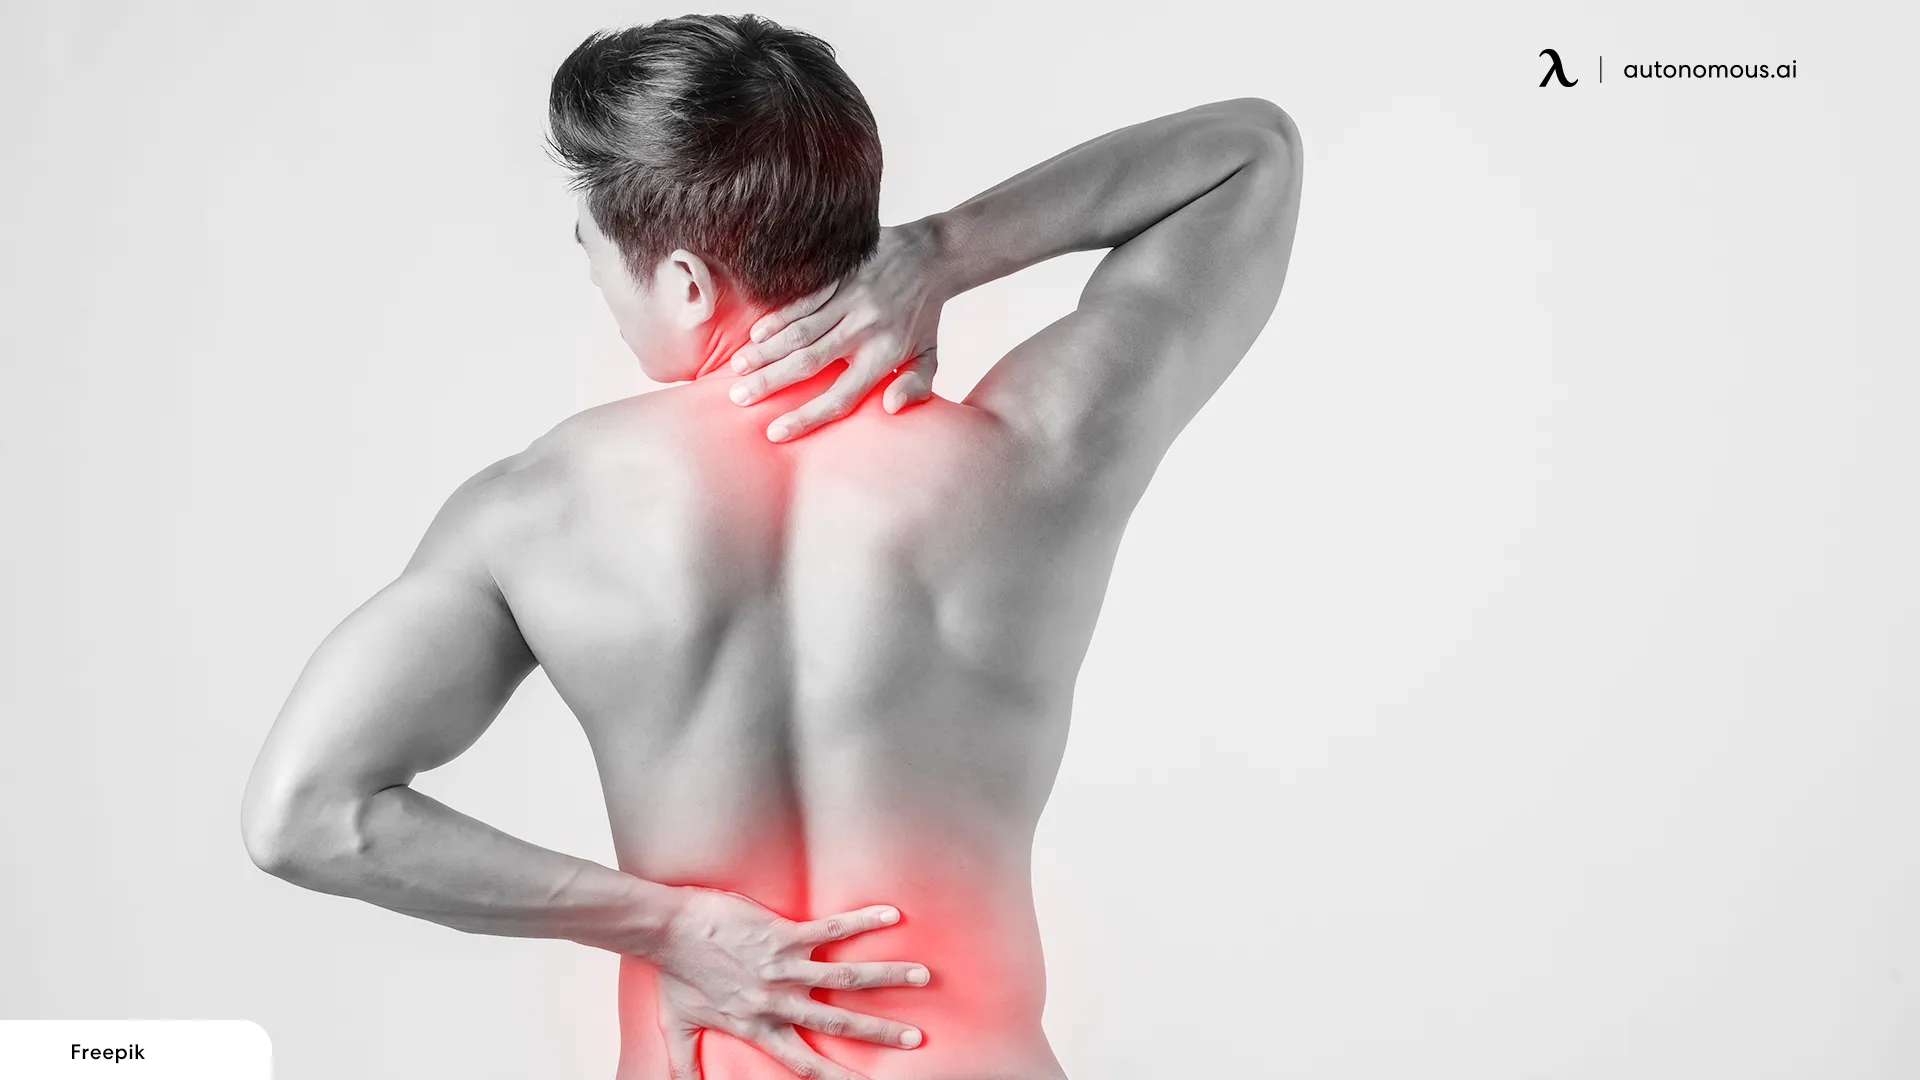 What is Middle Back Pain?